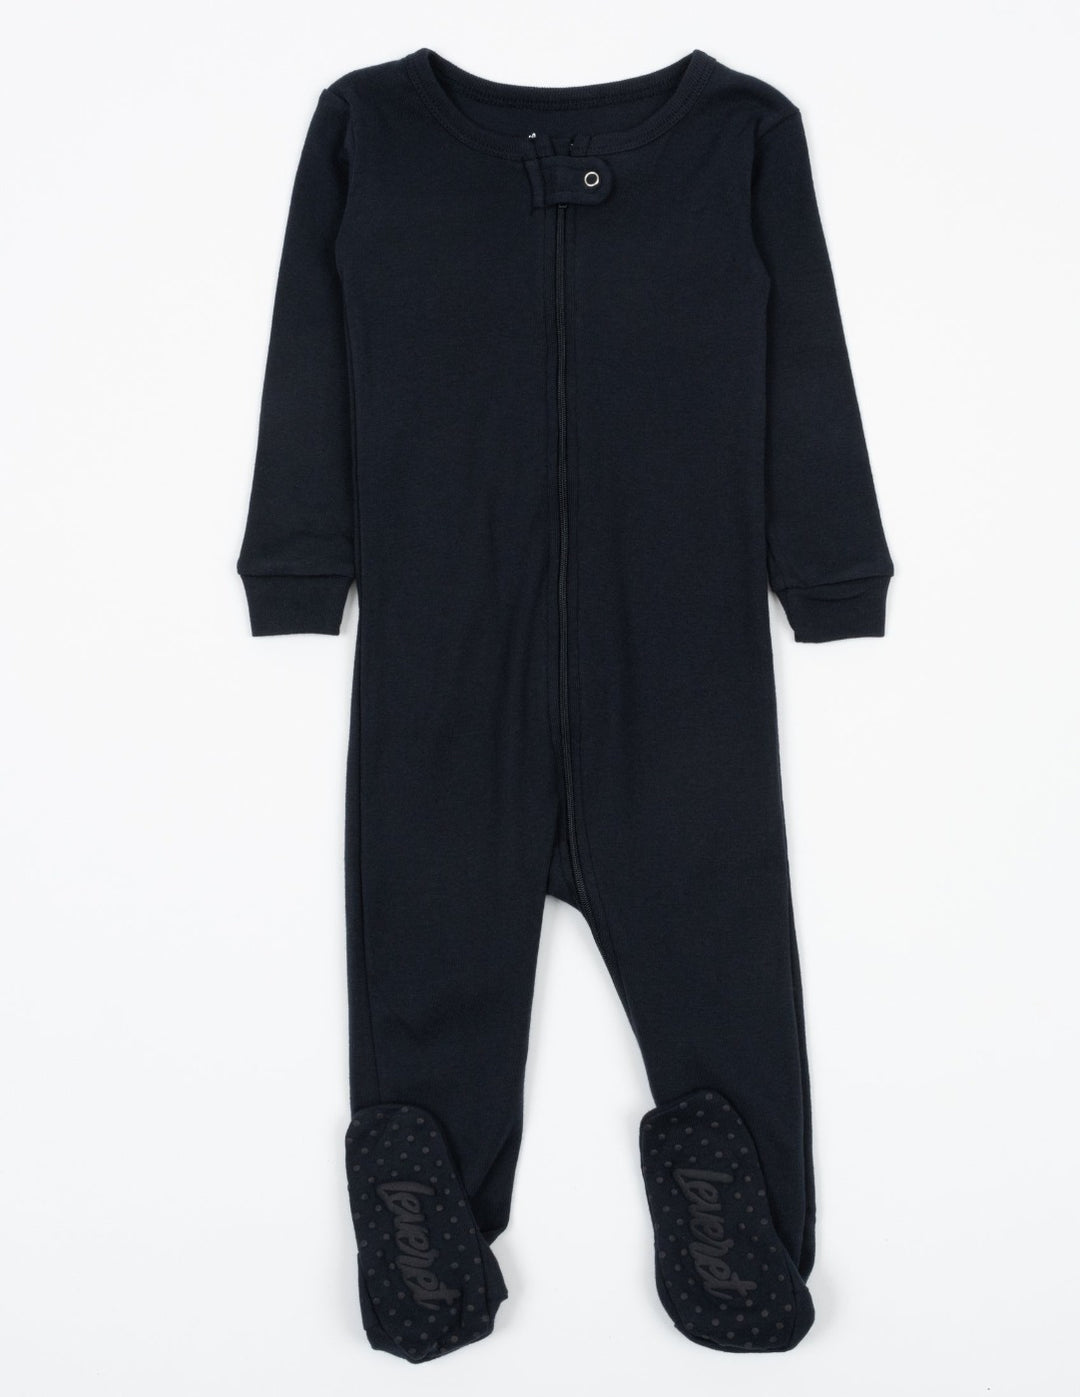 solid color navy baby footed pajamas